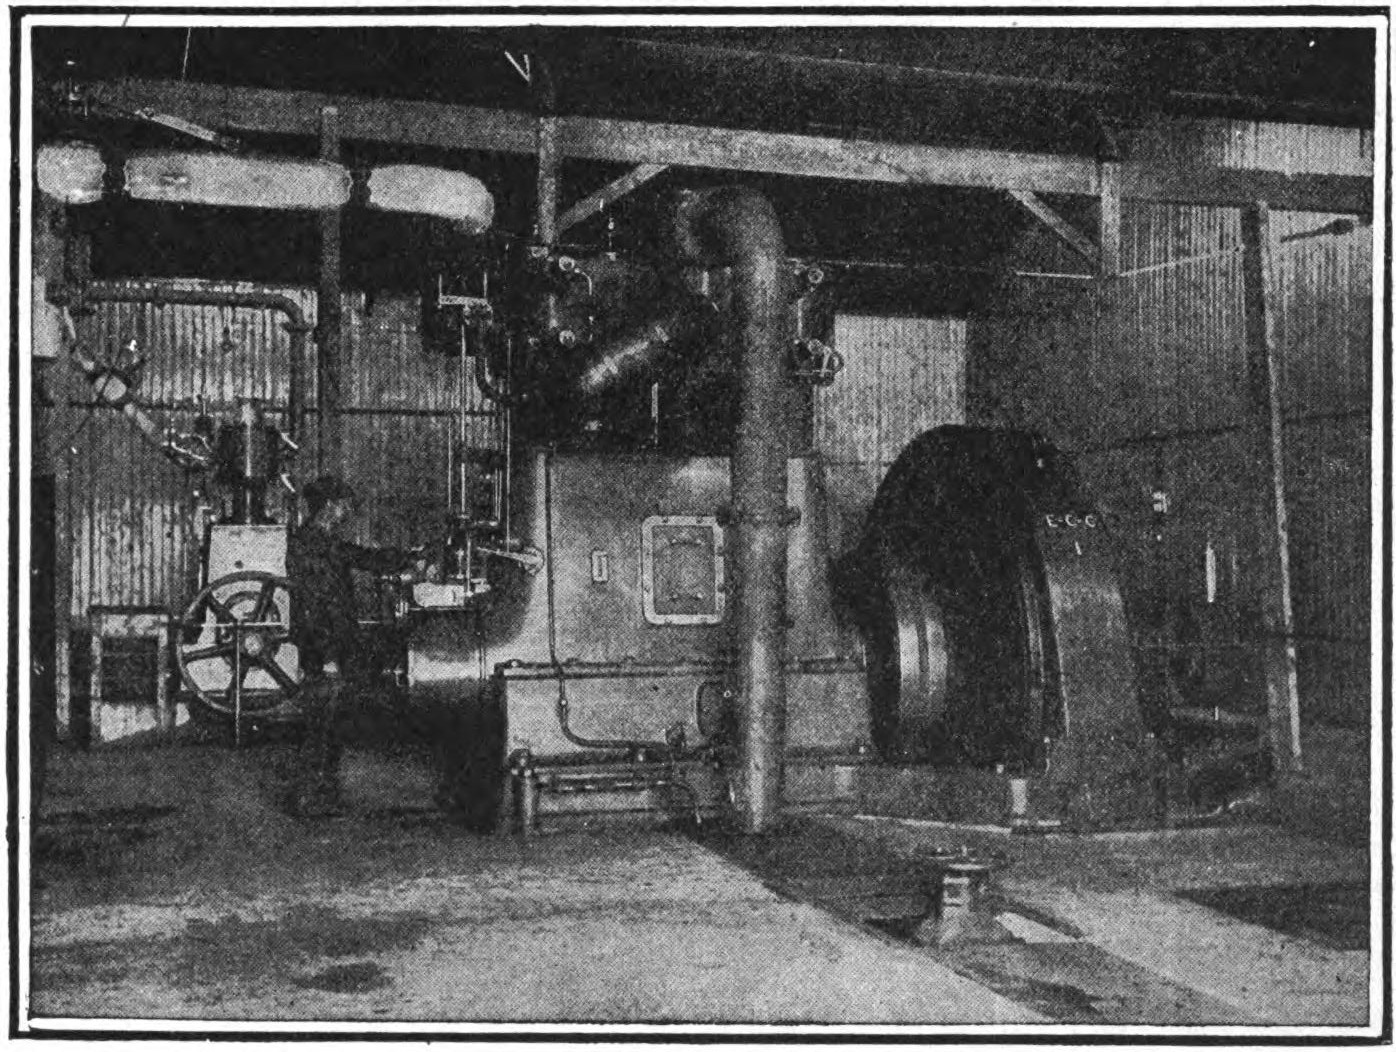 FIG. 29.—The power plant of a Marconi transatlantic station, showing engine and generator.